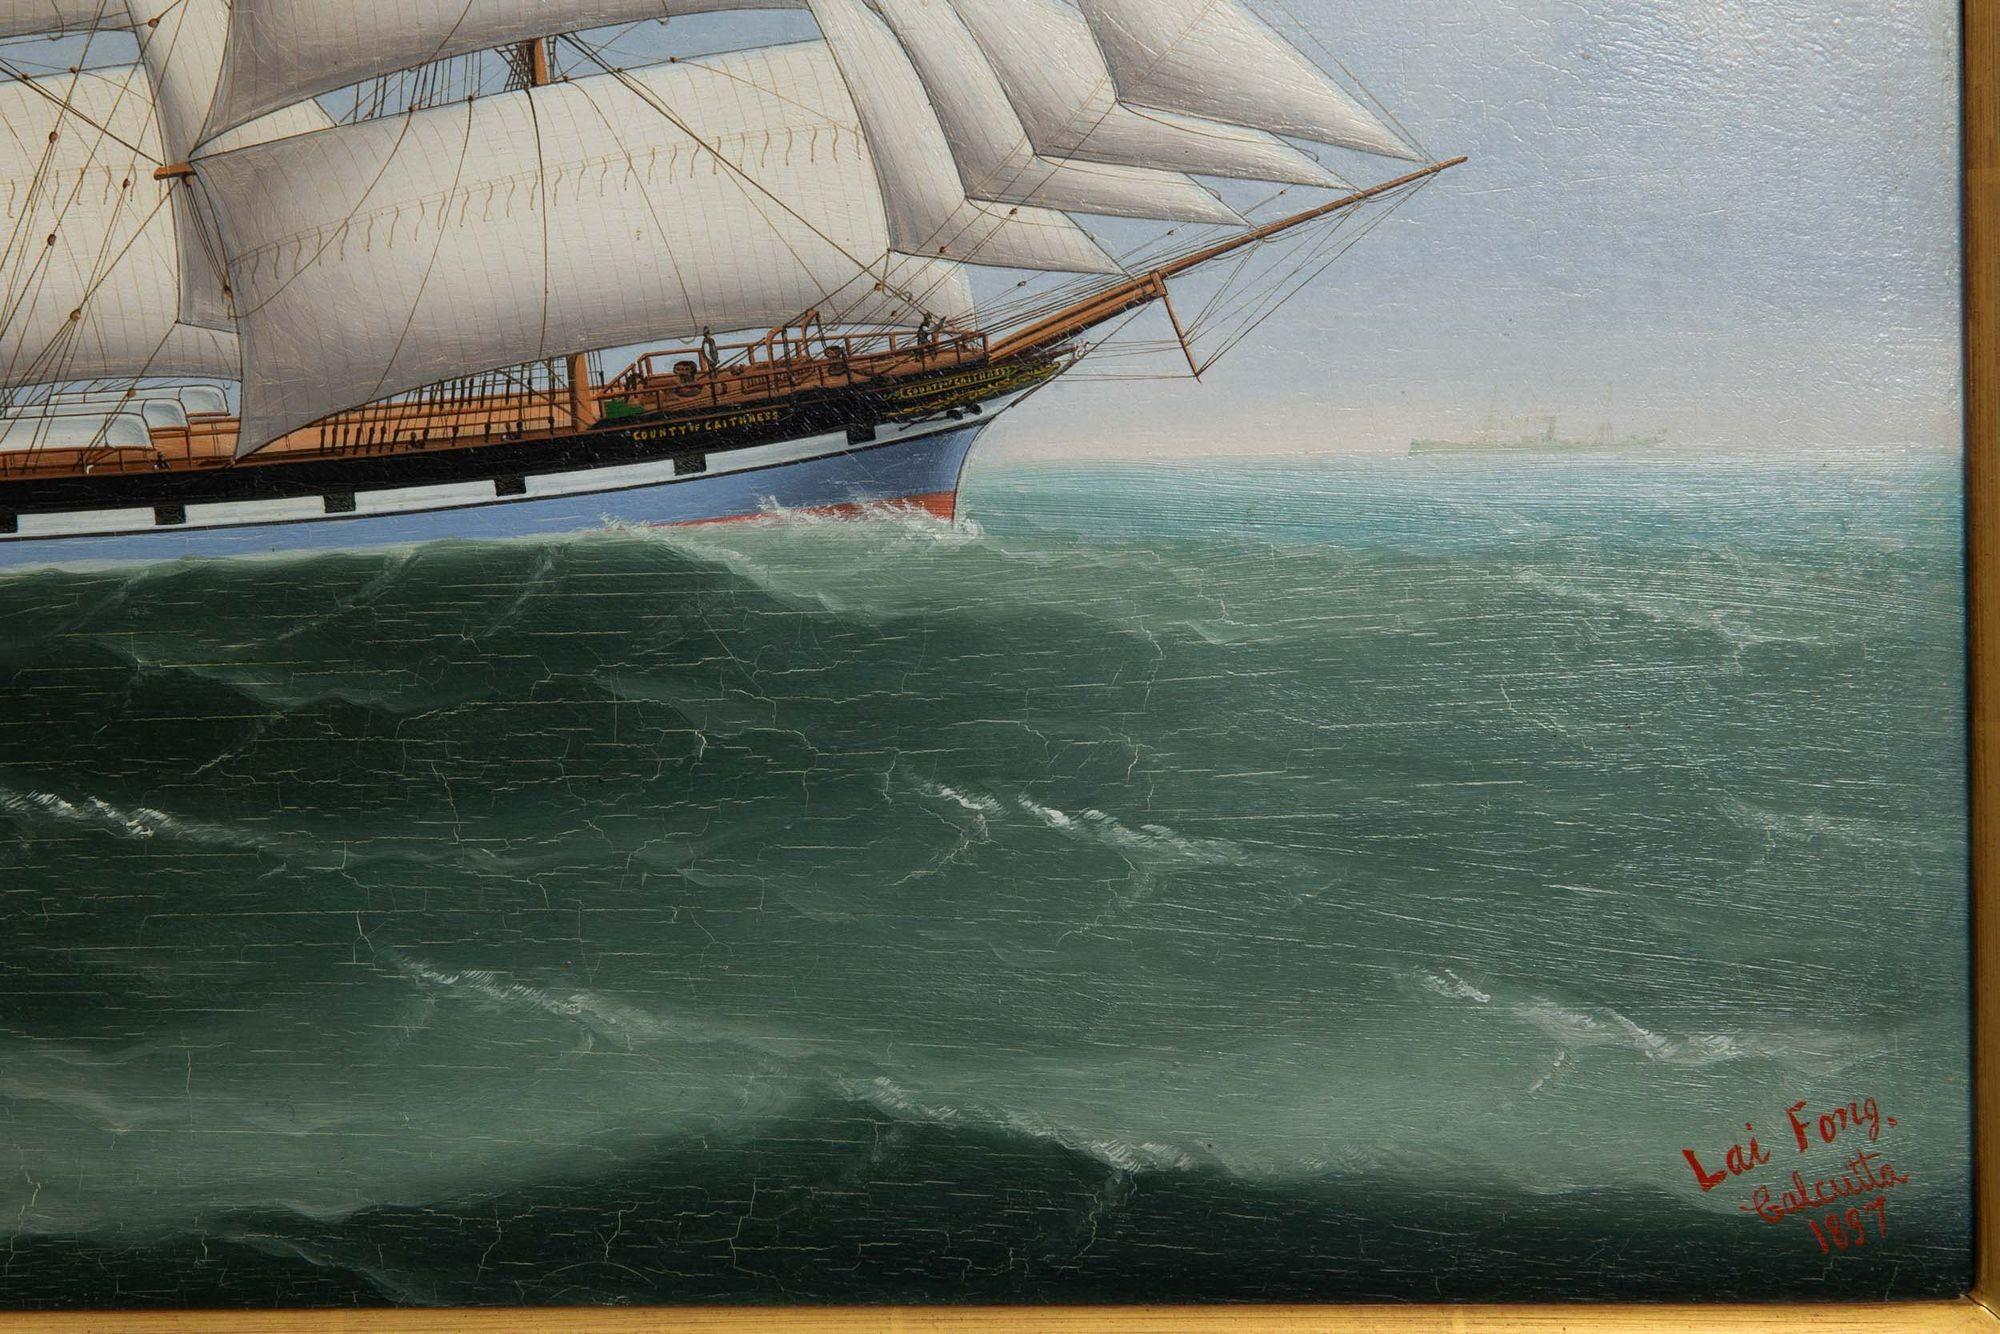 Canvas China Trade Nautical Seascape of Ship “County of Caithness” (1897) by Lai Fong For Sale